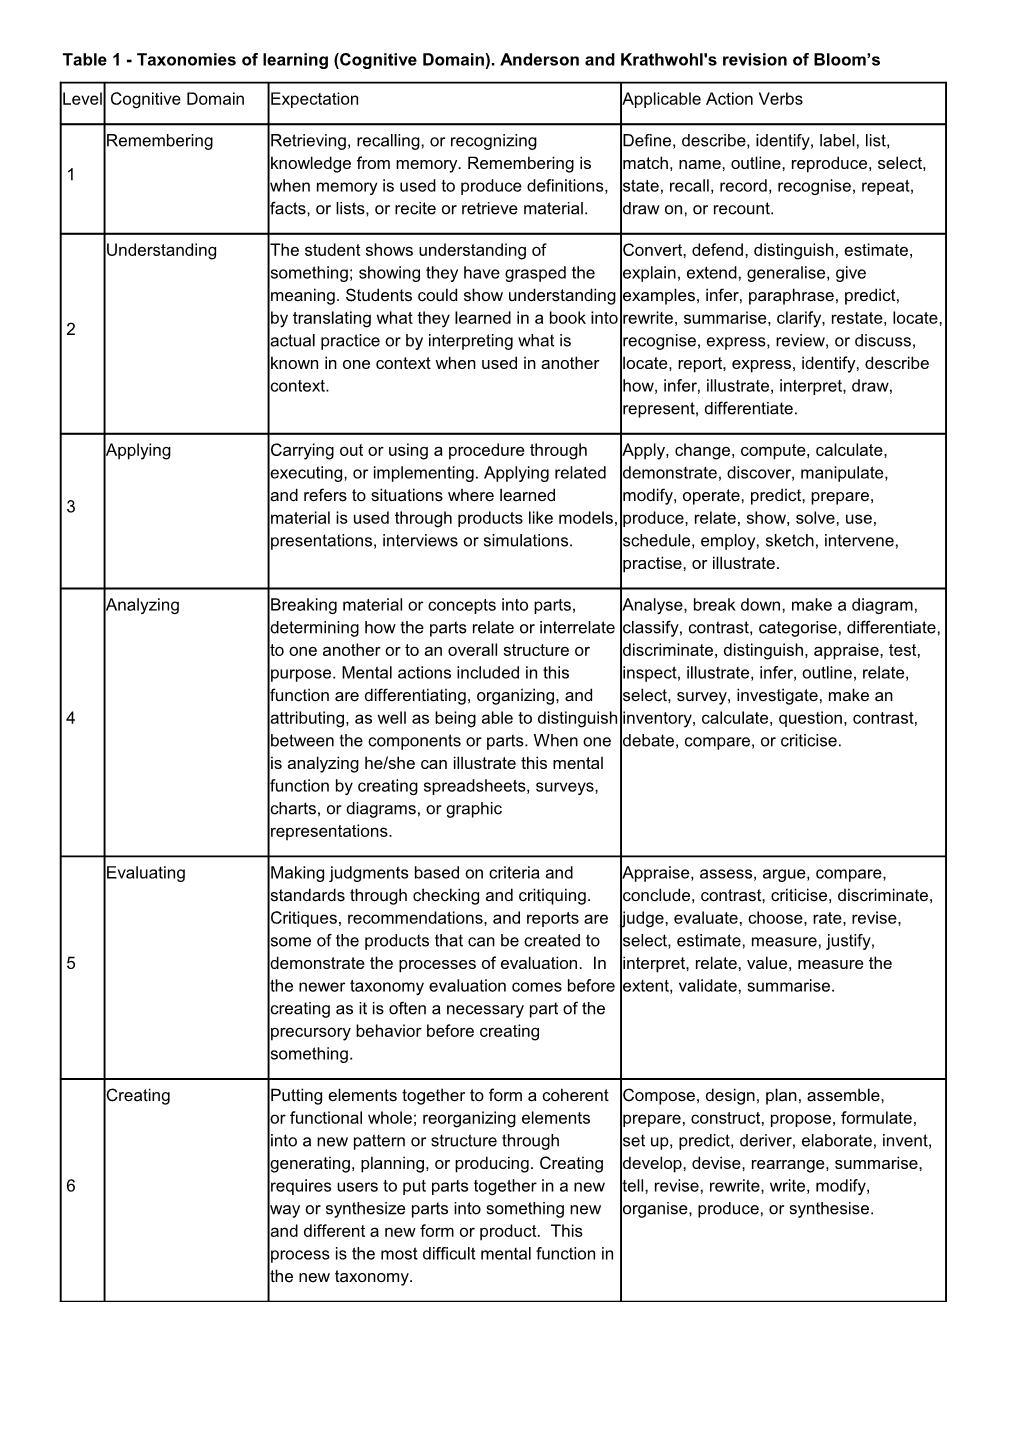 Table 1 - Taxonomies of Learning (Cognitive Domain). Anderson and Krathwohl's Revision